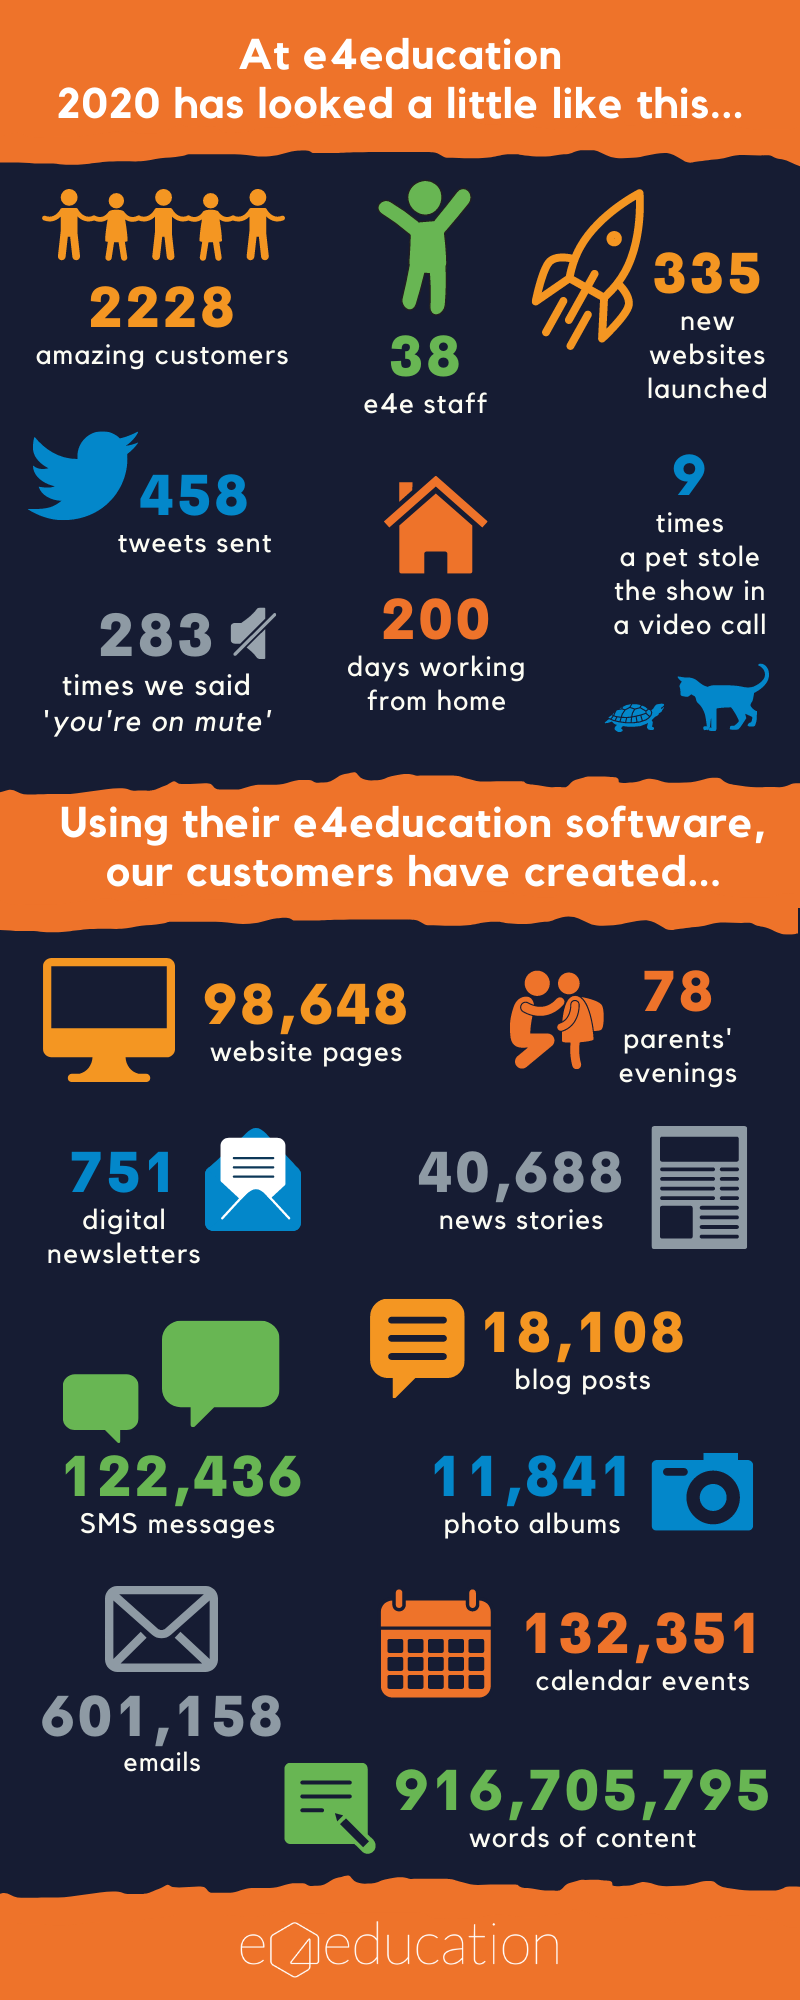 Infographic of e4education stats in 2020